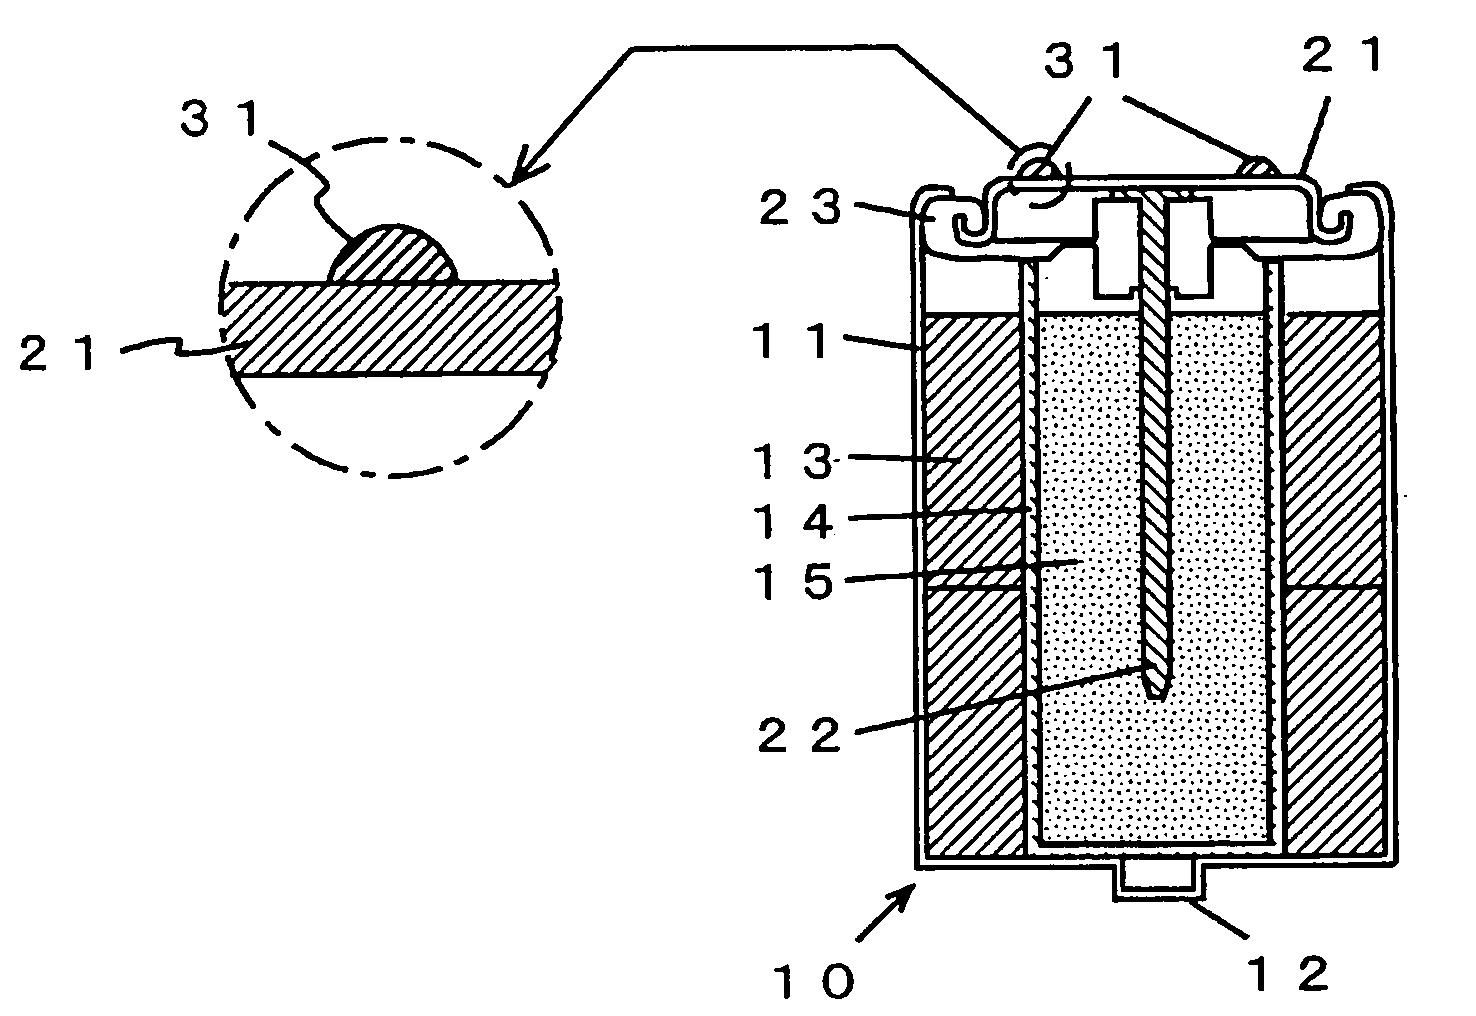 Battery terminal, battery, and battery holder